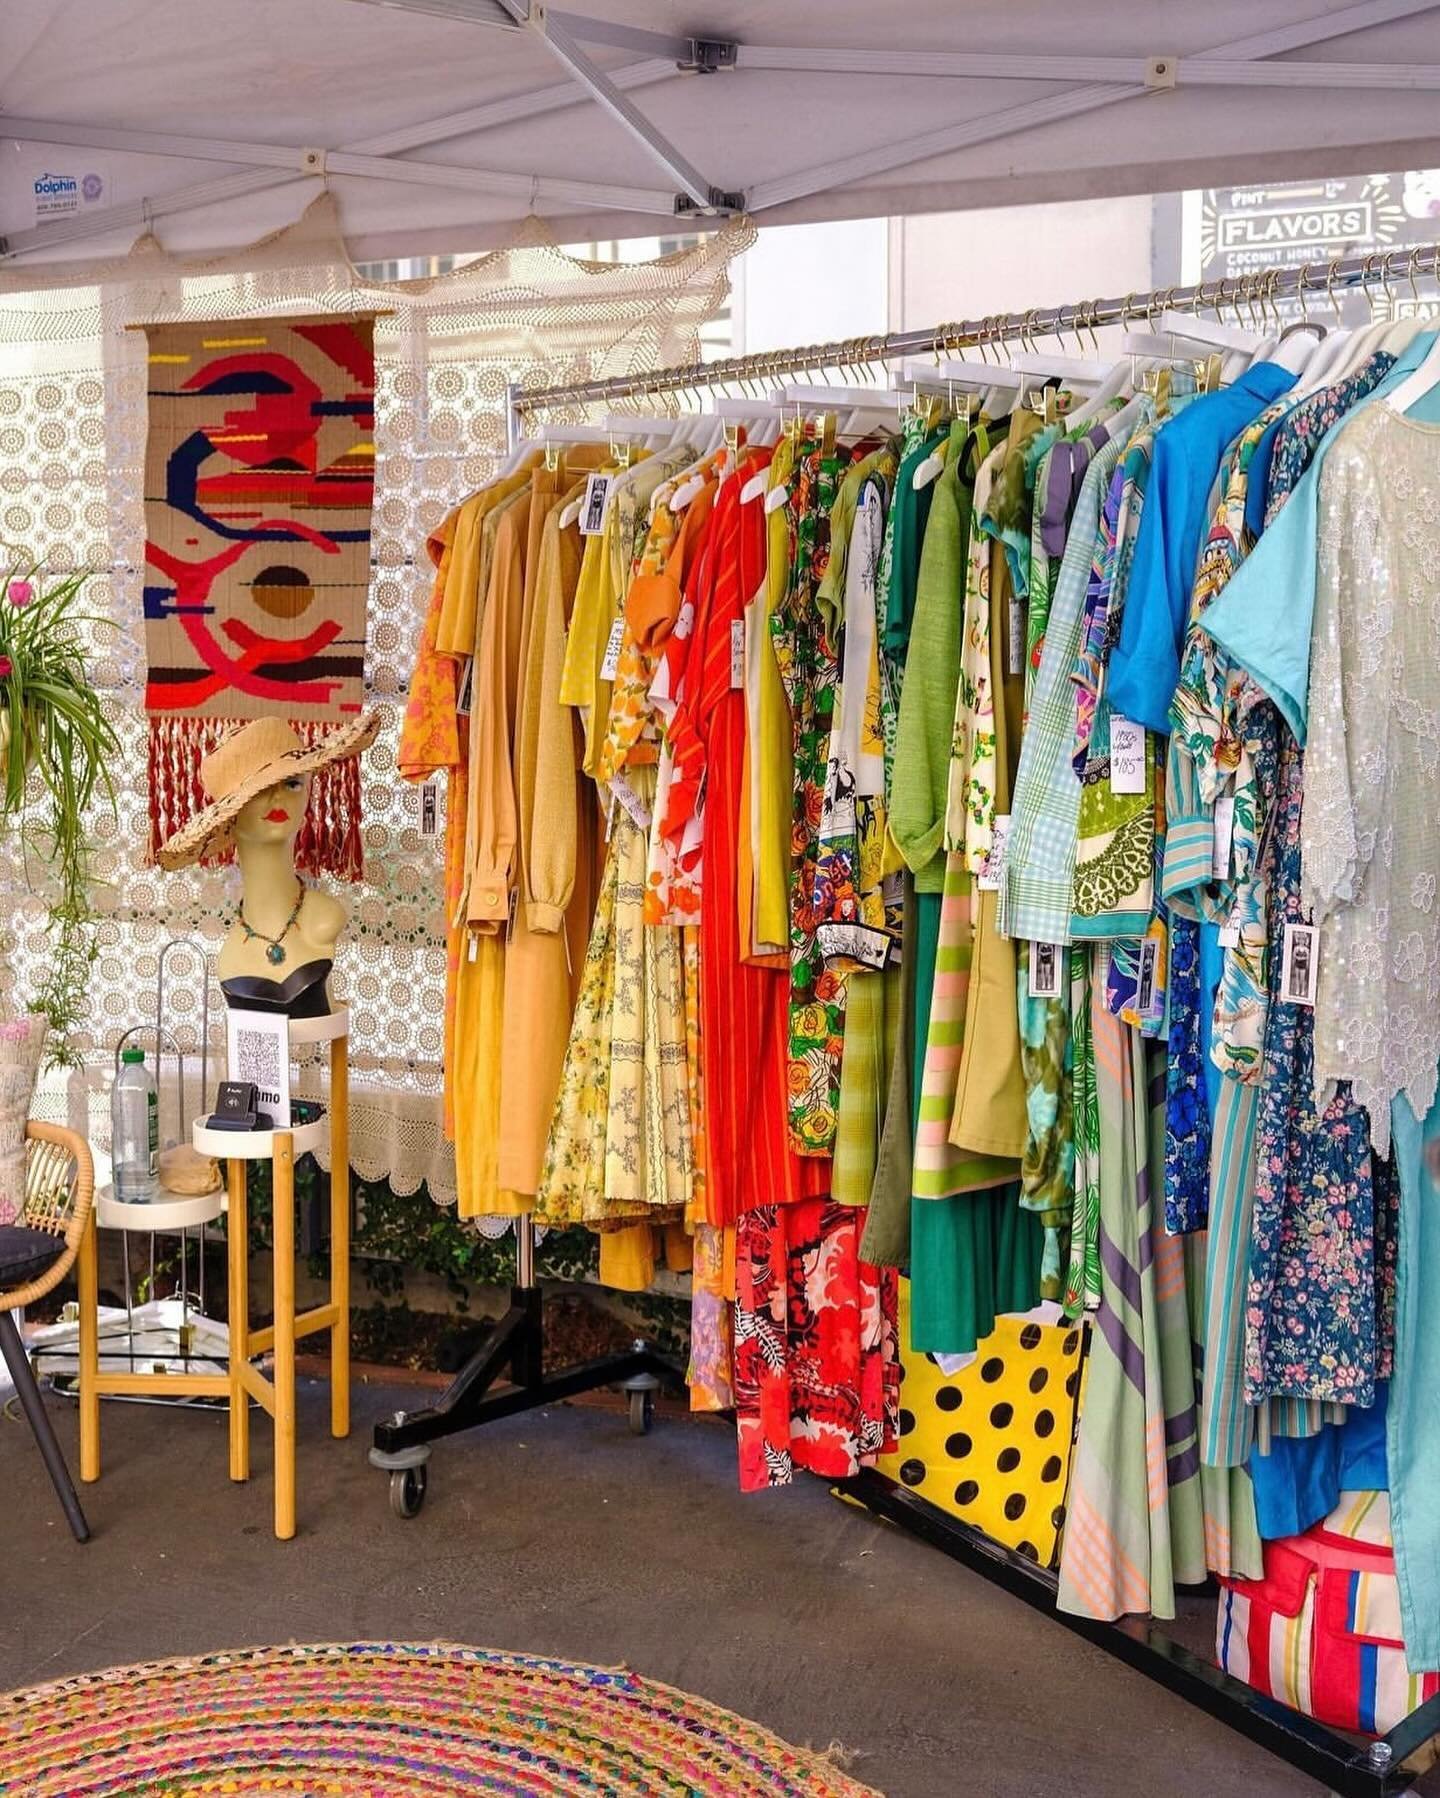 TODAY ⭐Join us at @rowdtla for our April market, kicking off at 10am. Shop 50+ local sellers and their incredible collections. Tickets available at the door. Open until 4pm! 

#thingstodoinla #vintage #vintageclothing #dtla #rowdtla